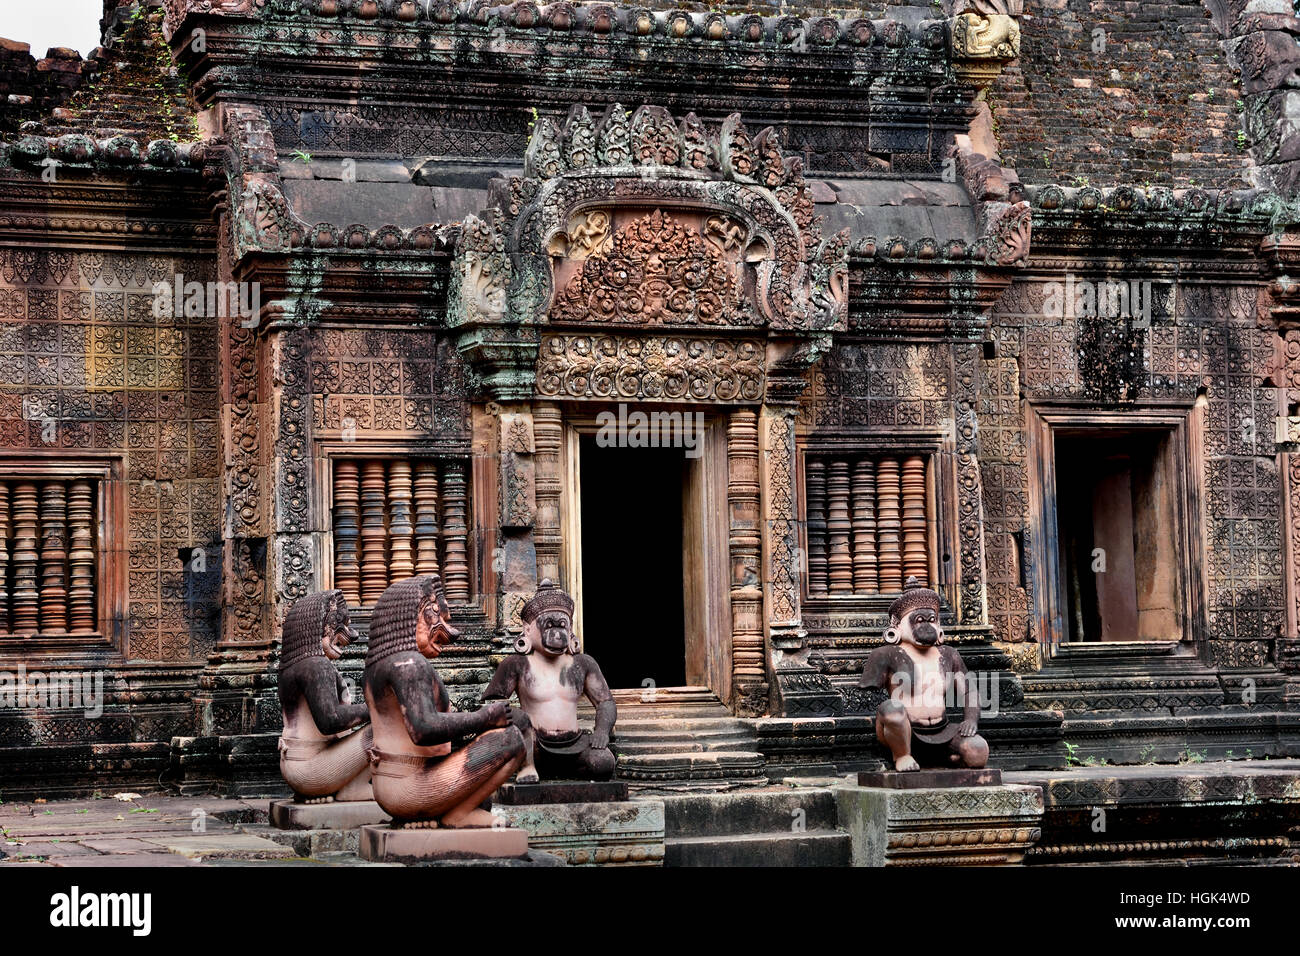 Banteay Srei - Srey Cambodian Temple 10th century Hindu temple dedicated to Shiva. Siem Reap, Cambodia ( Angkor complex different archaeological capitals Khmer Empire 9-15th century ) Stock Photo